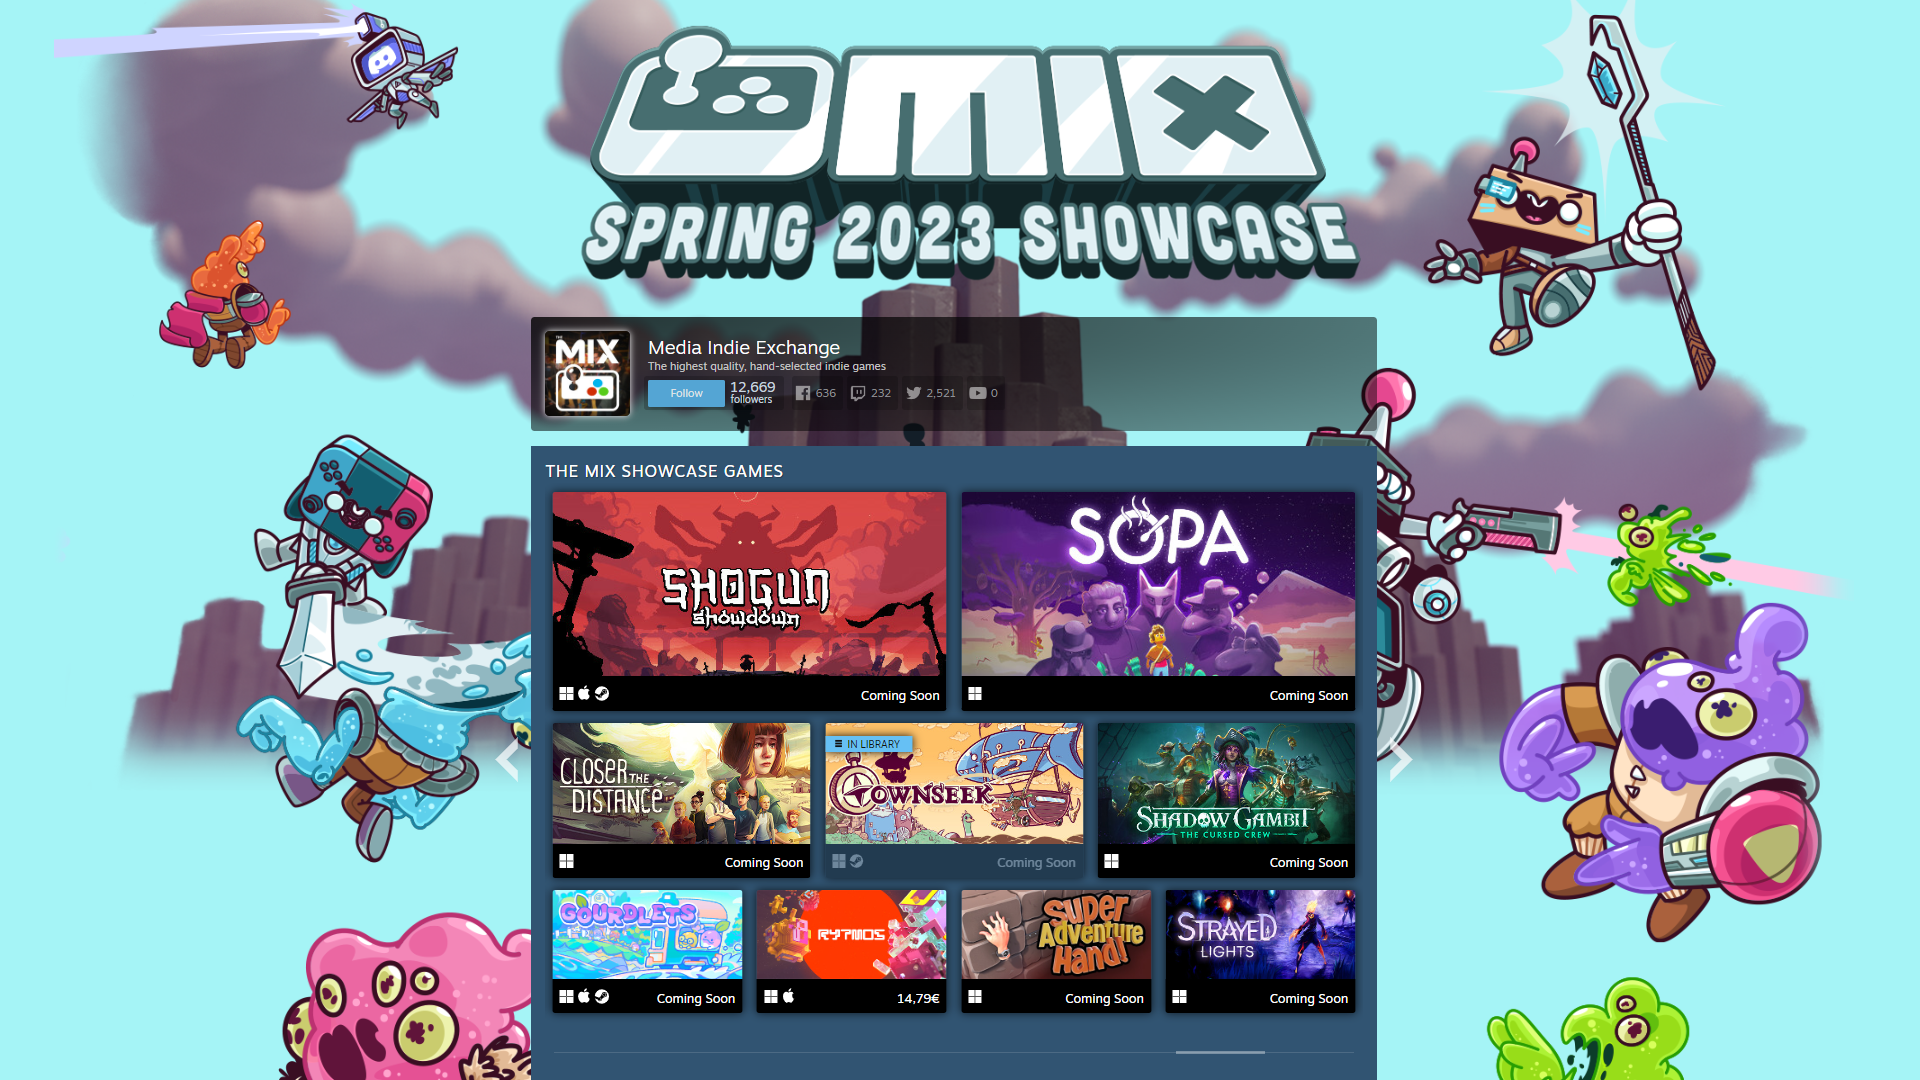 Screenshot of the Steam Event Page for The Mix Spring Showcase. Townseek is one of the featured games in the section for "The Mix Showcase Games".